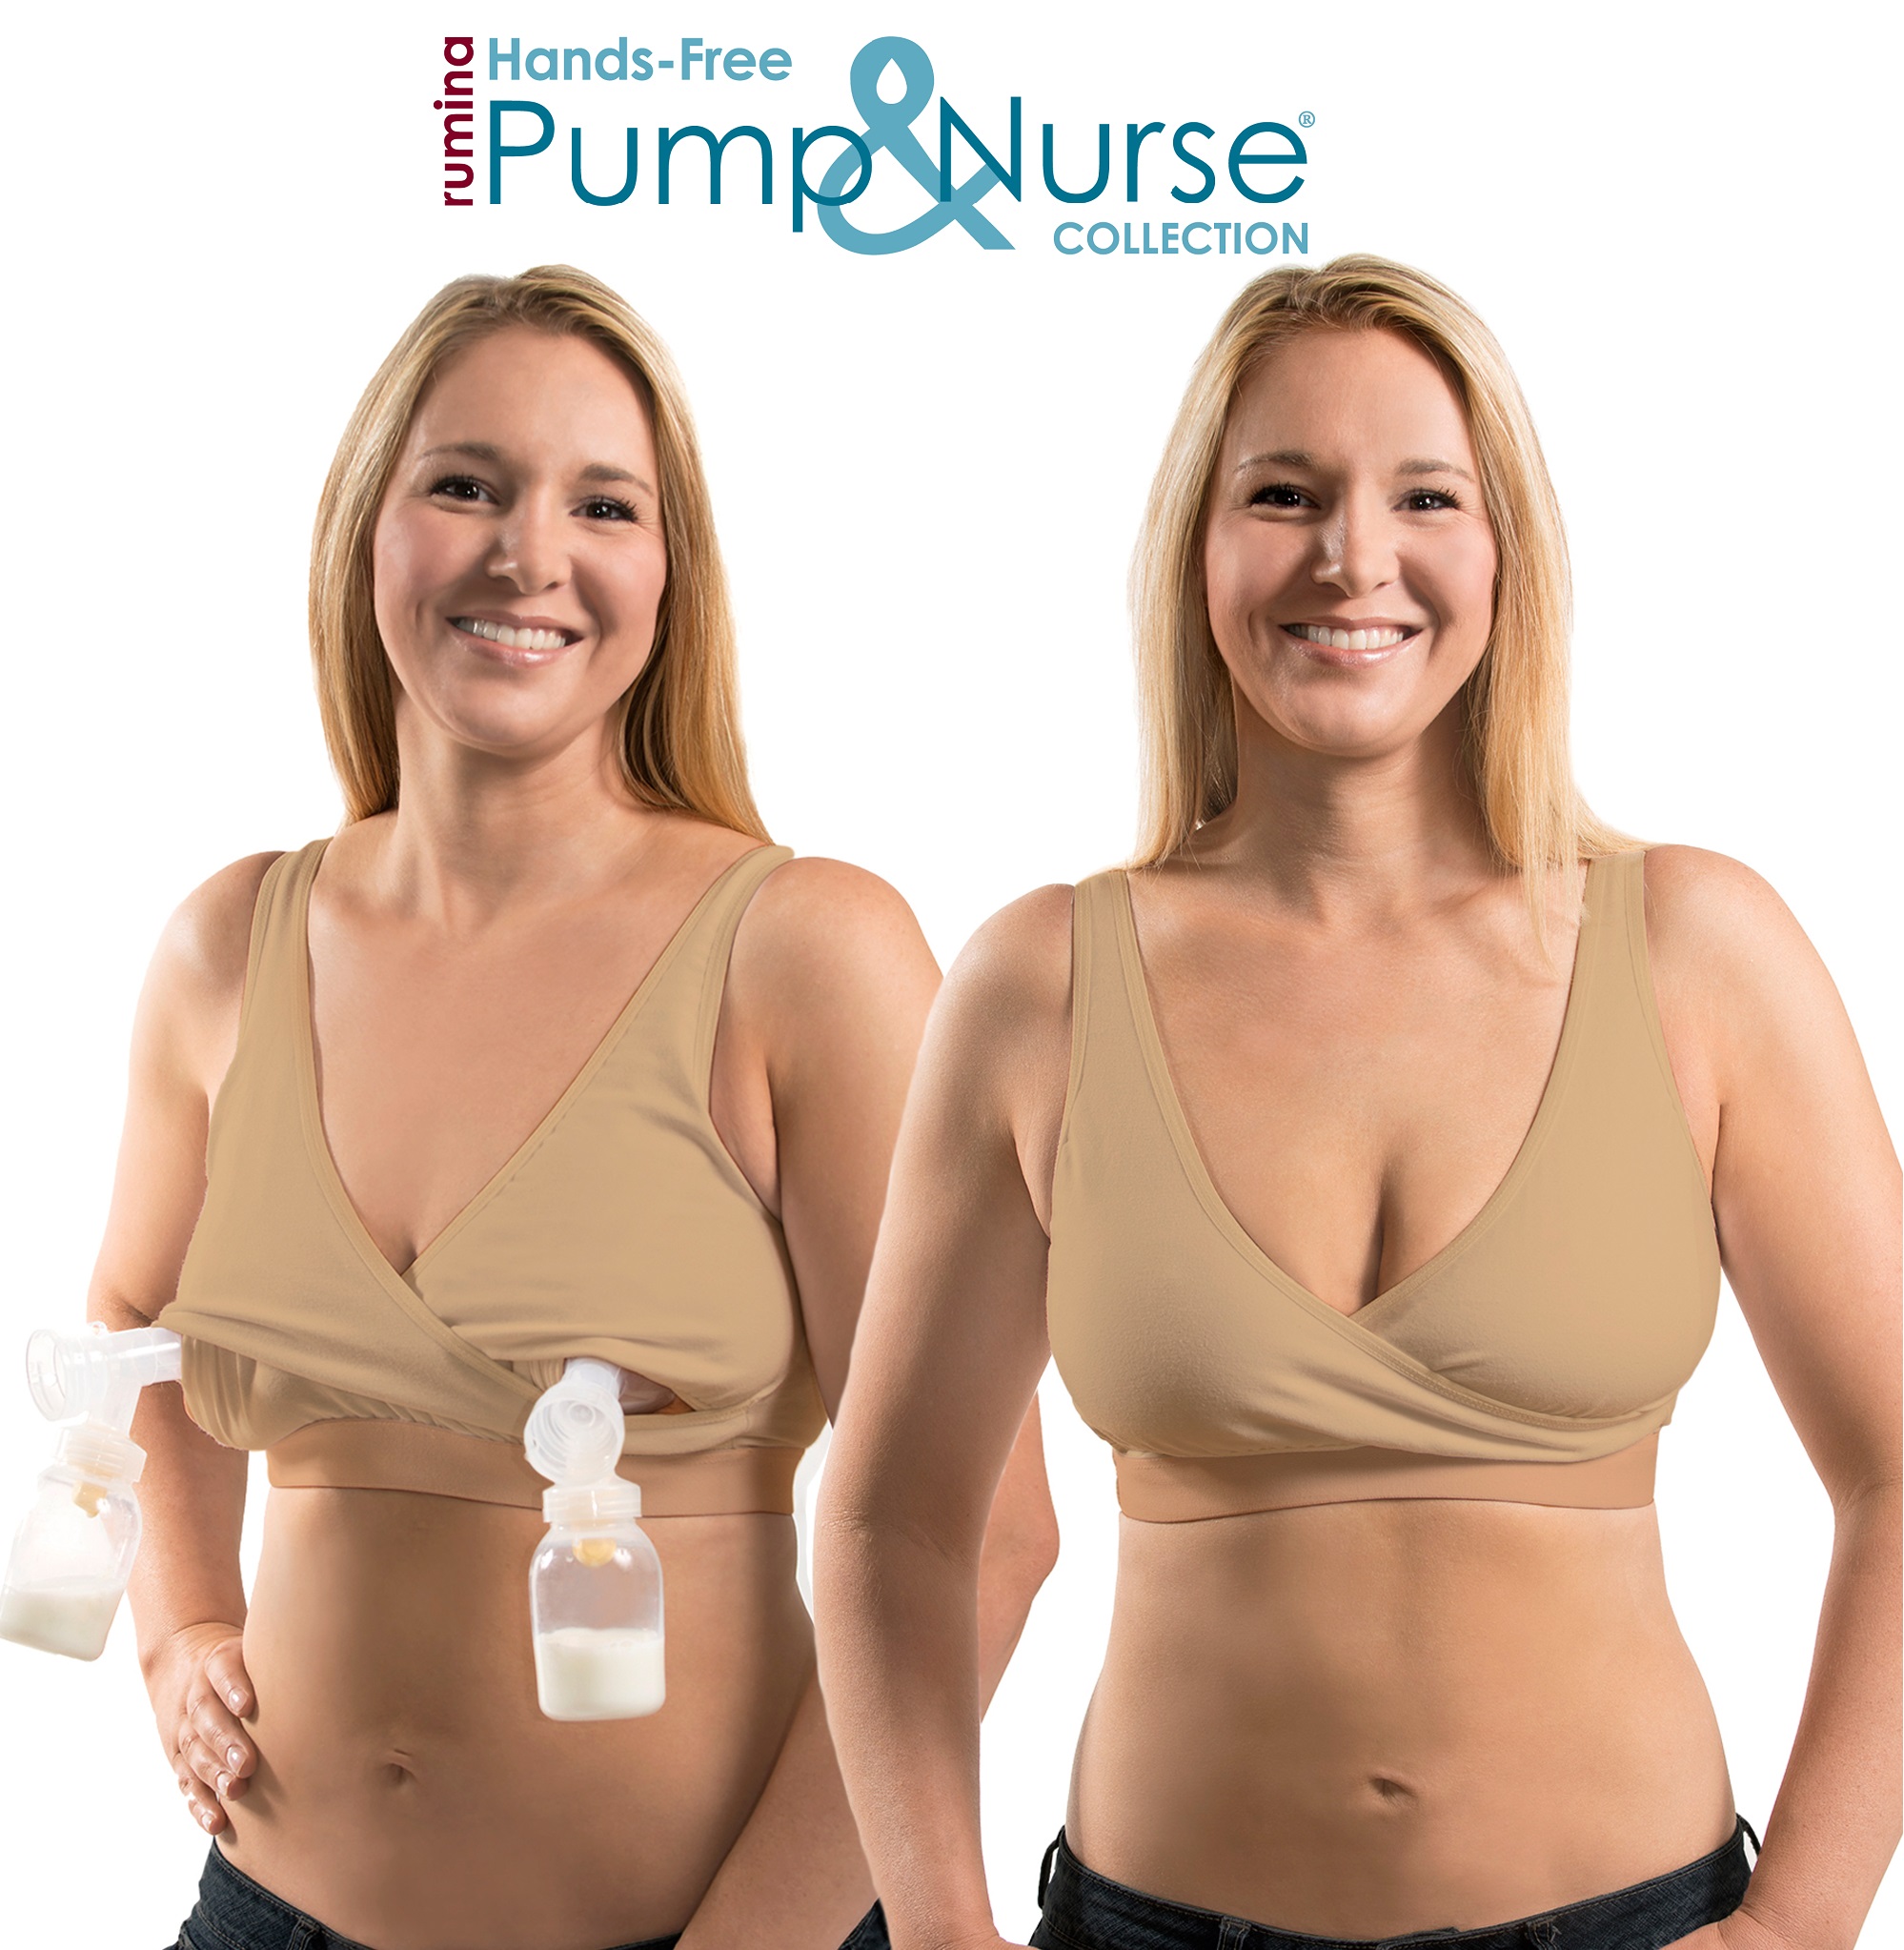  Rumina Racerback Hands Free Pump&Nurse Nursing Bra for Pumping.  Perfect for Breastfeeding Pumps by Spectra, Medela, Lansinoh, etc., Nude L  : Clothing, Shoes & Jewelry